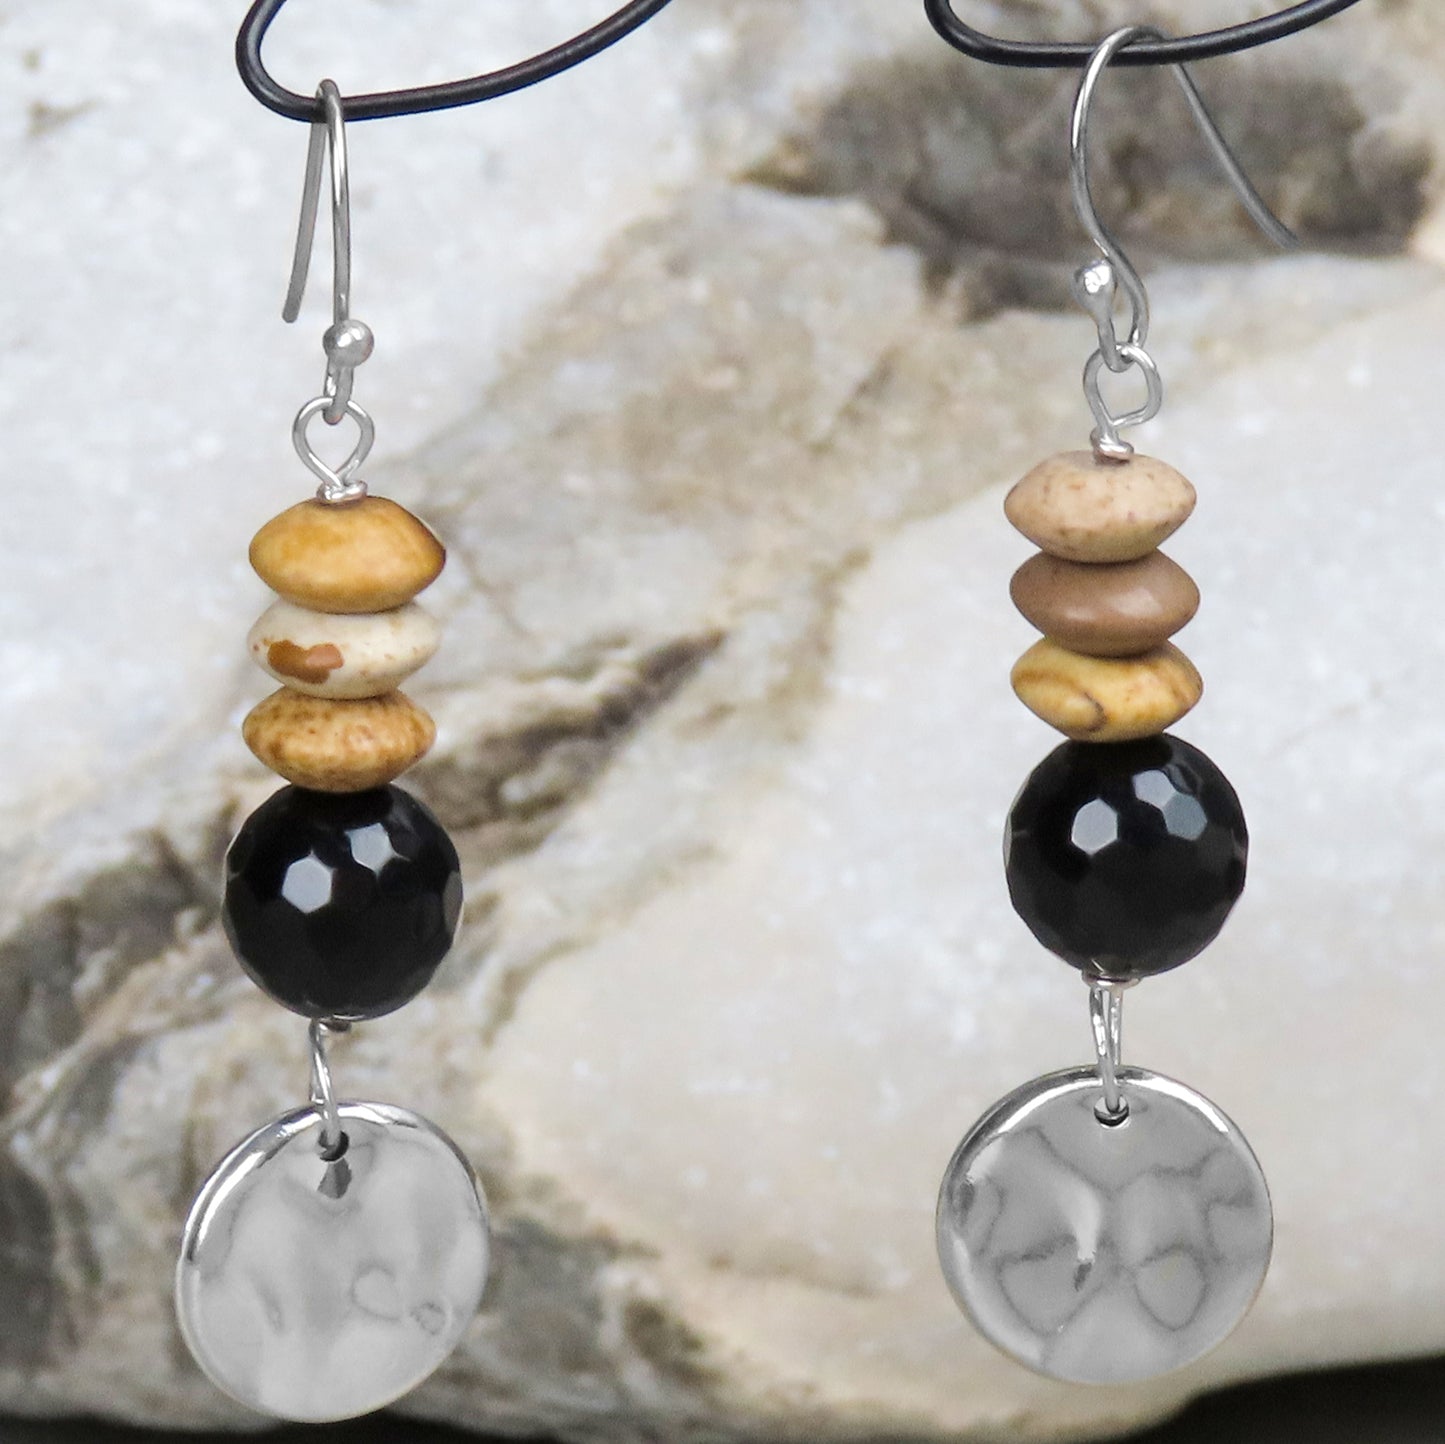 Large earrings Onyx Landscape Jasper 925 Silver modern natural colored striking outfits refine natural jewelry